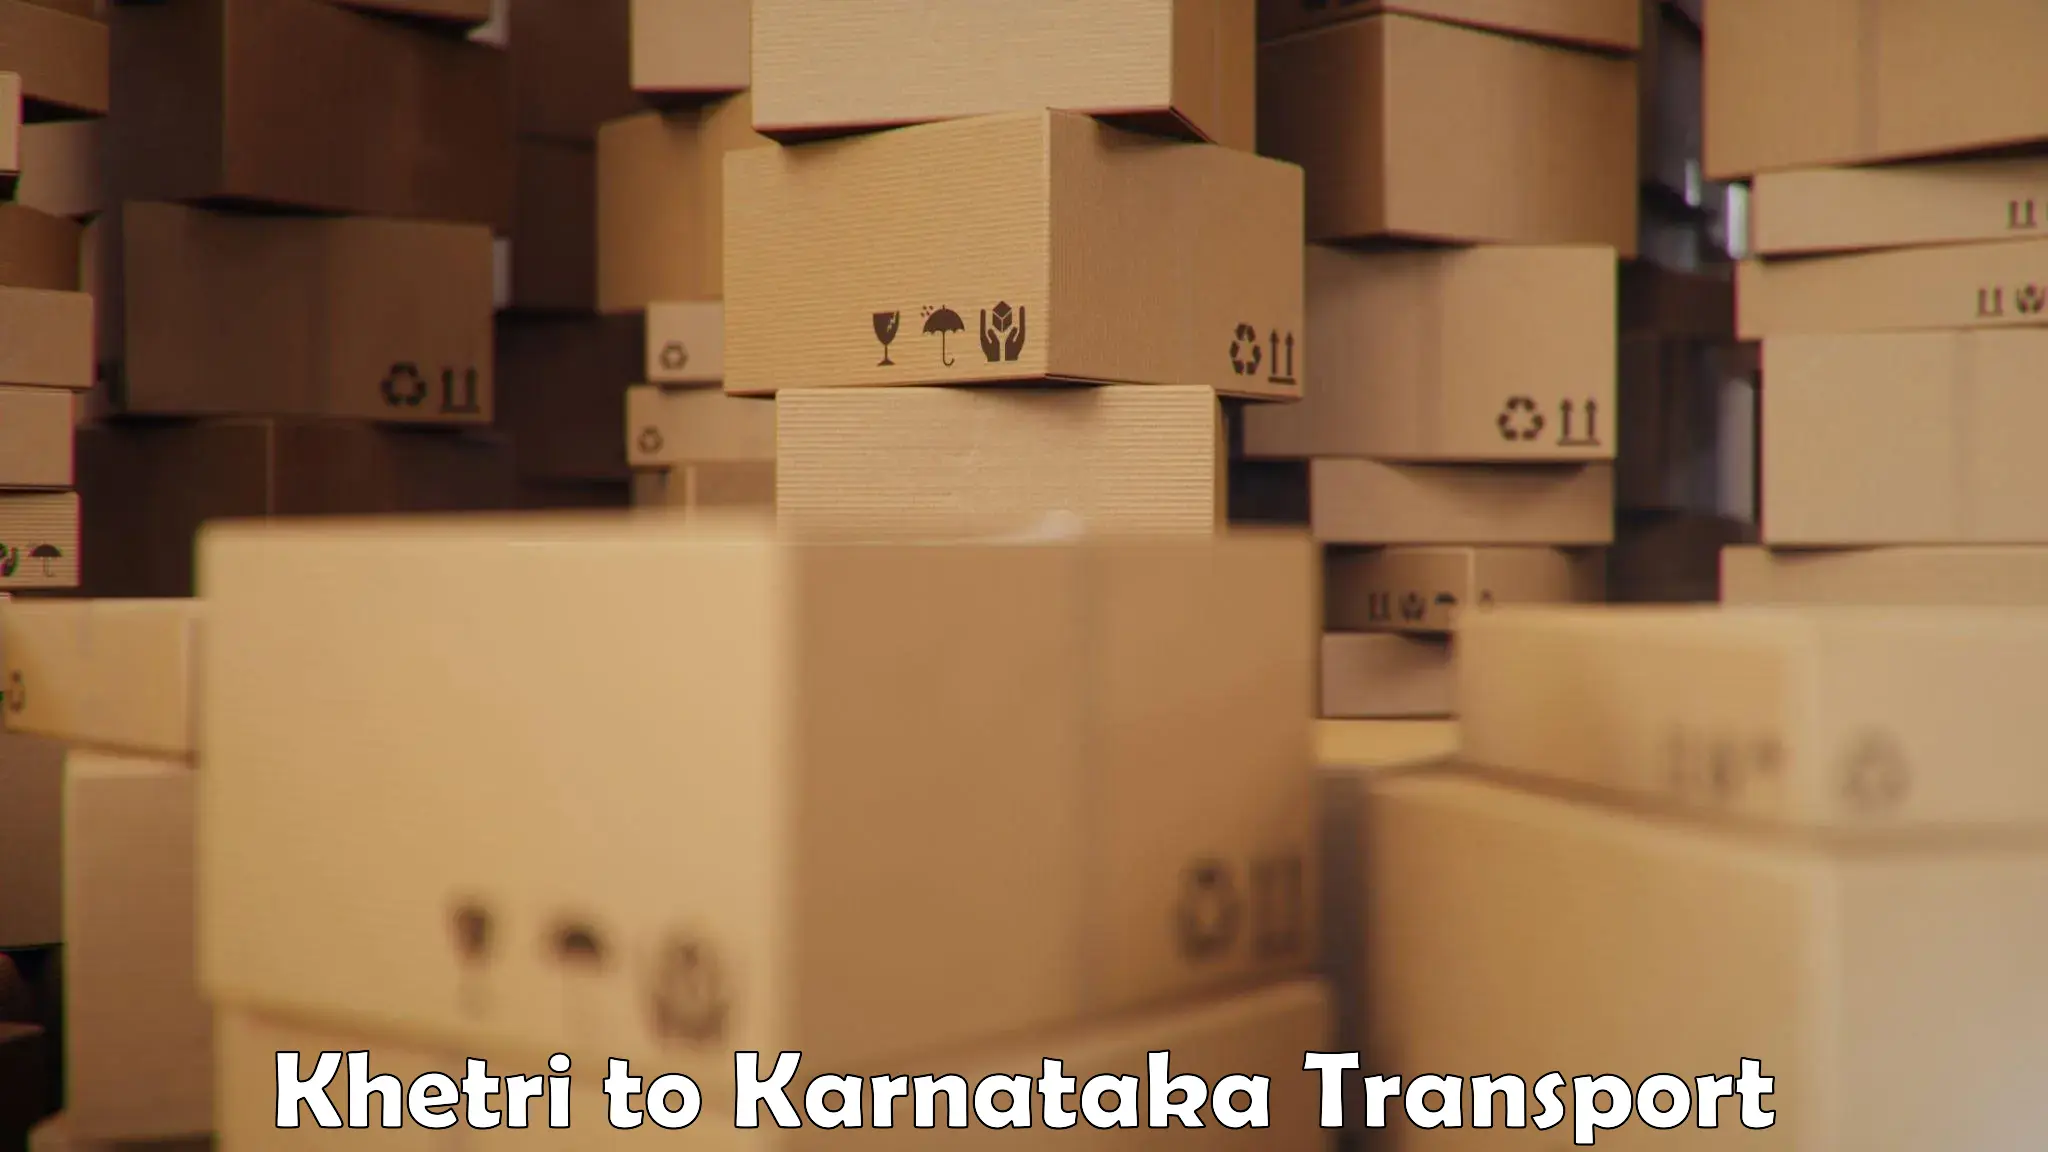 Express transport services in Khetri to Hagaribommanahalli